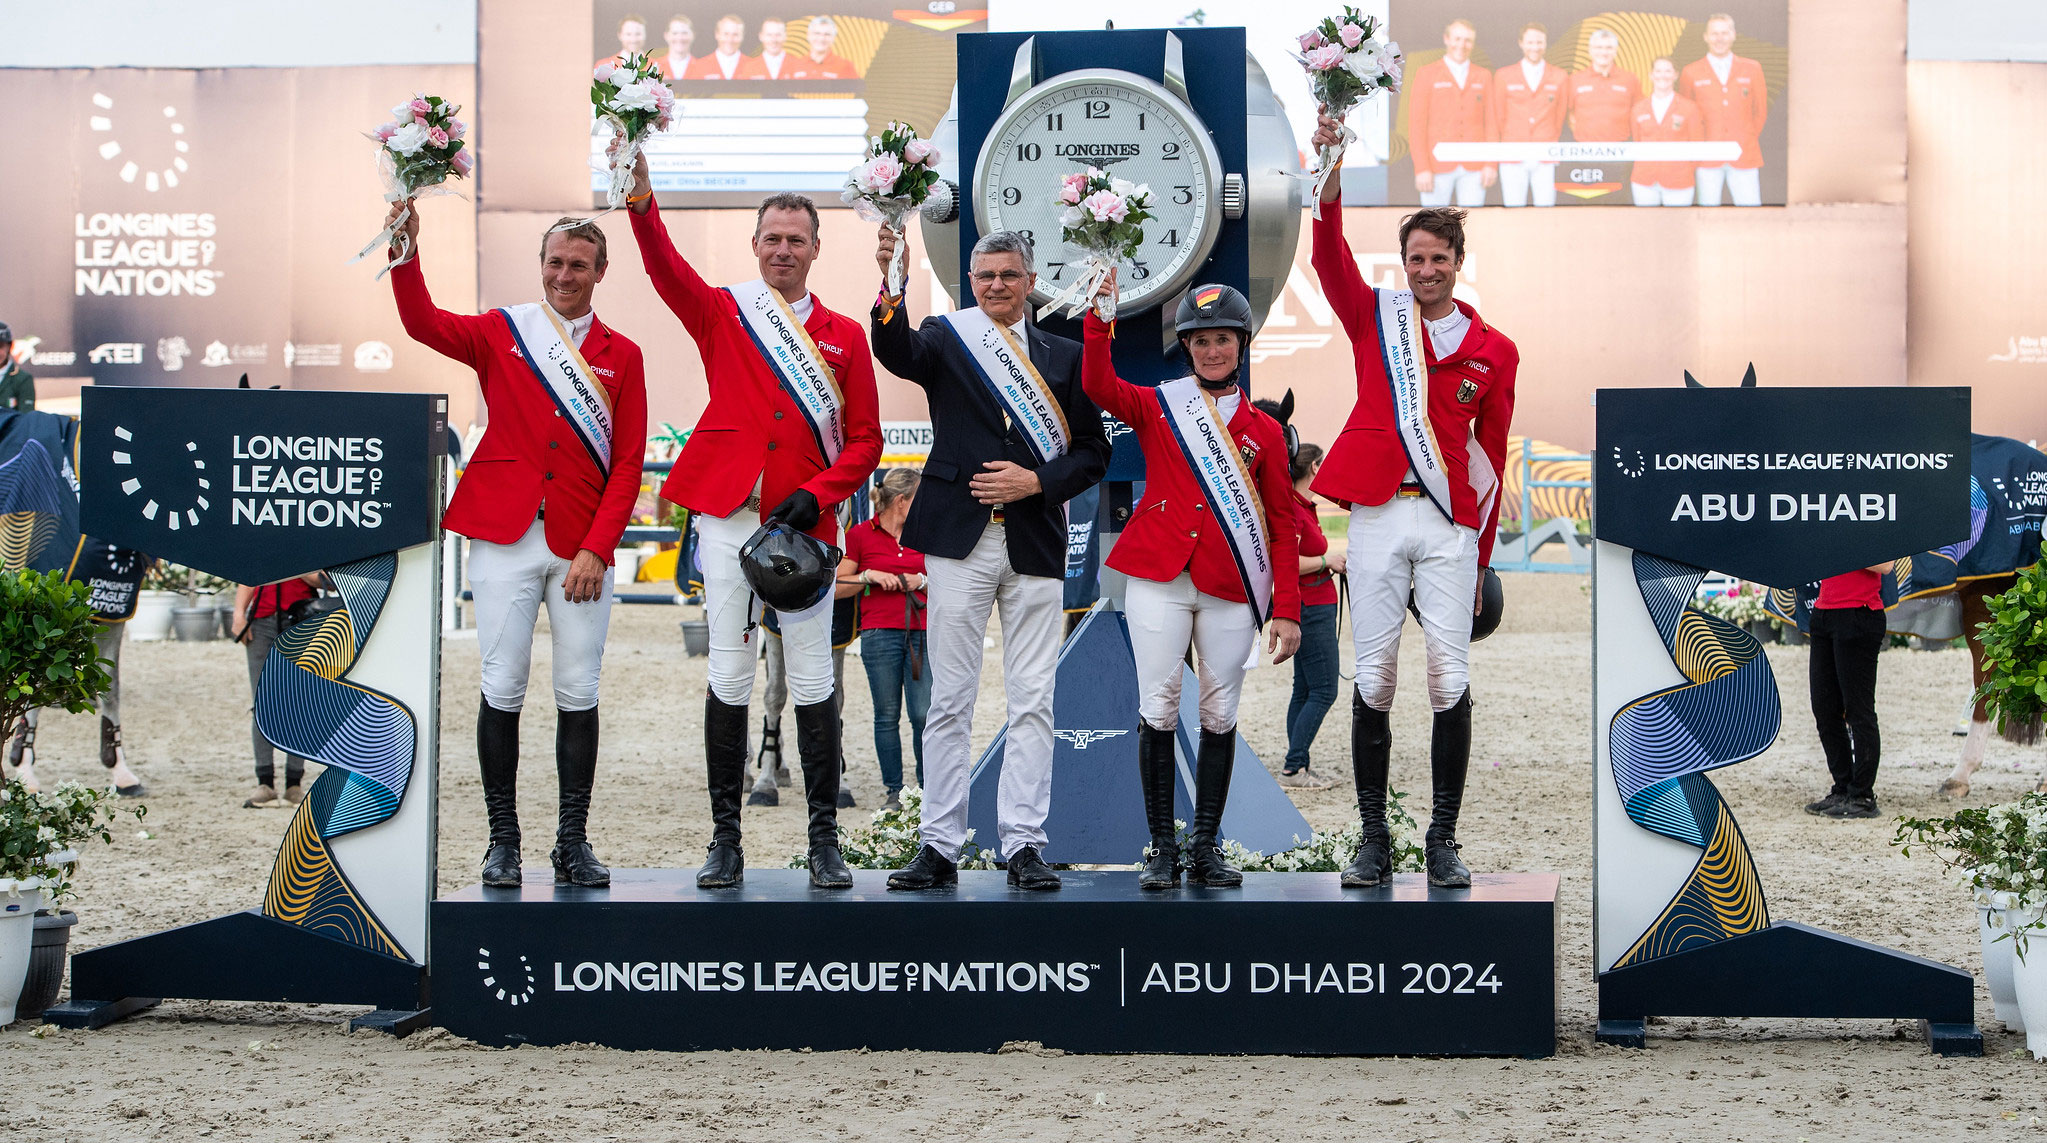 Longines League of Nations™ - Abu Dhabi - Germany wins the first qualifier